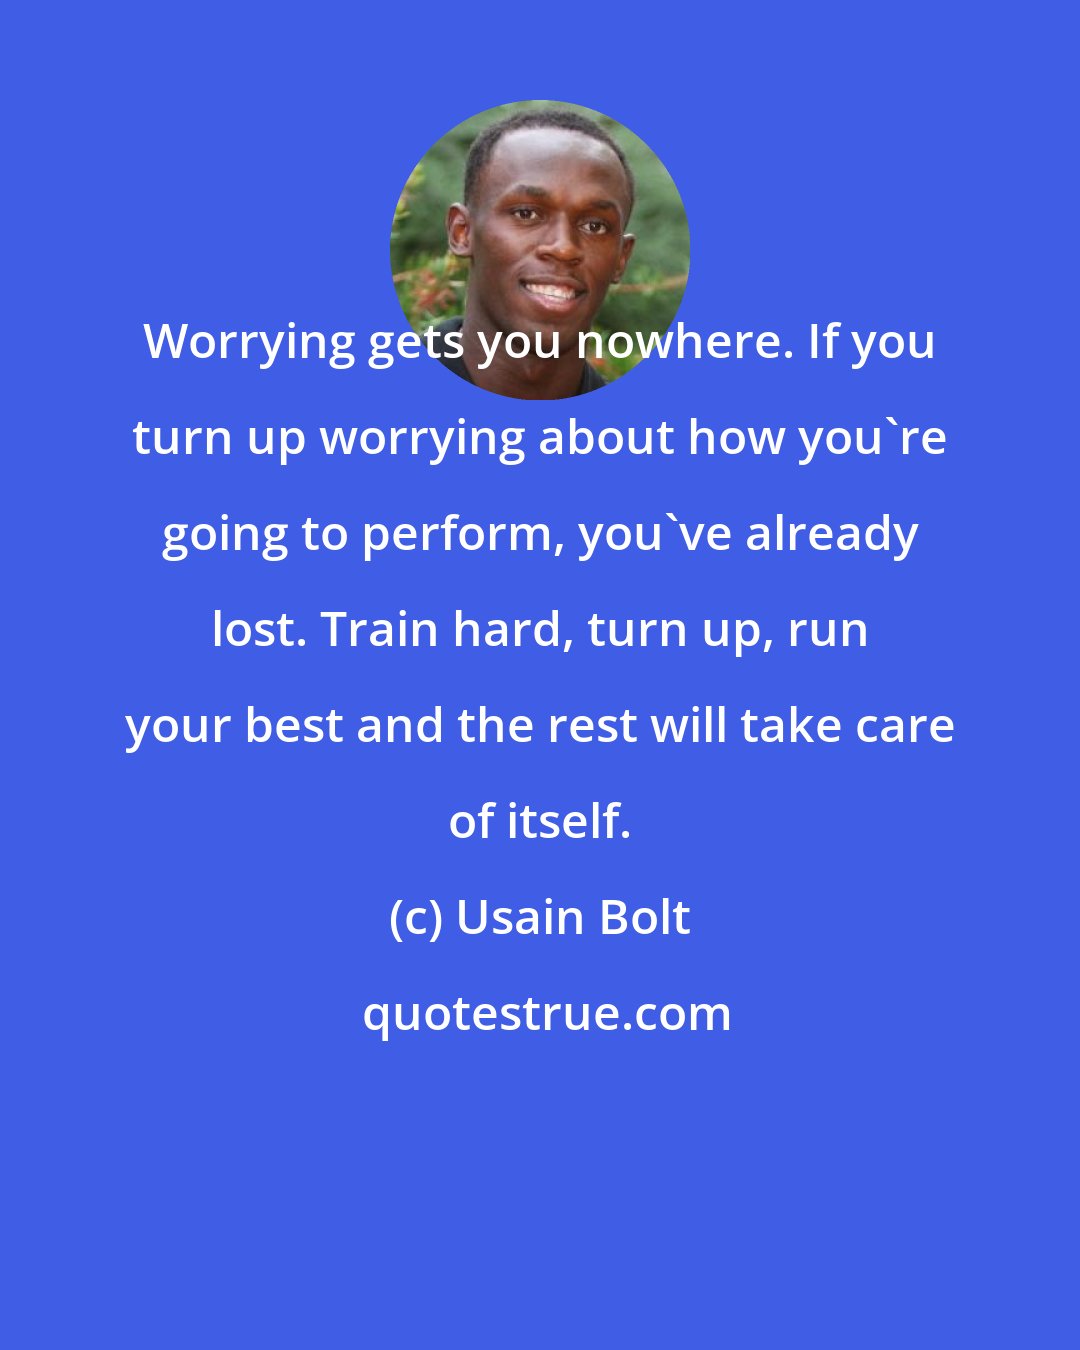 Usain Bolt: Worrying gets you nowhere. If you turn up worrying about how you're going to perform, you've already lost. Train hard, turn up, run your best and the rest will take care of itself.